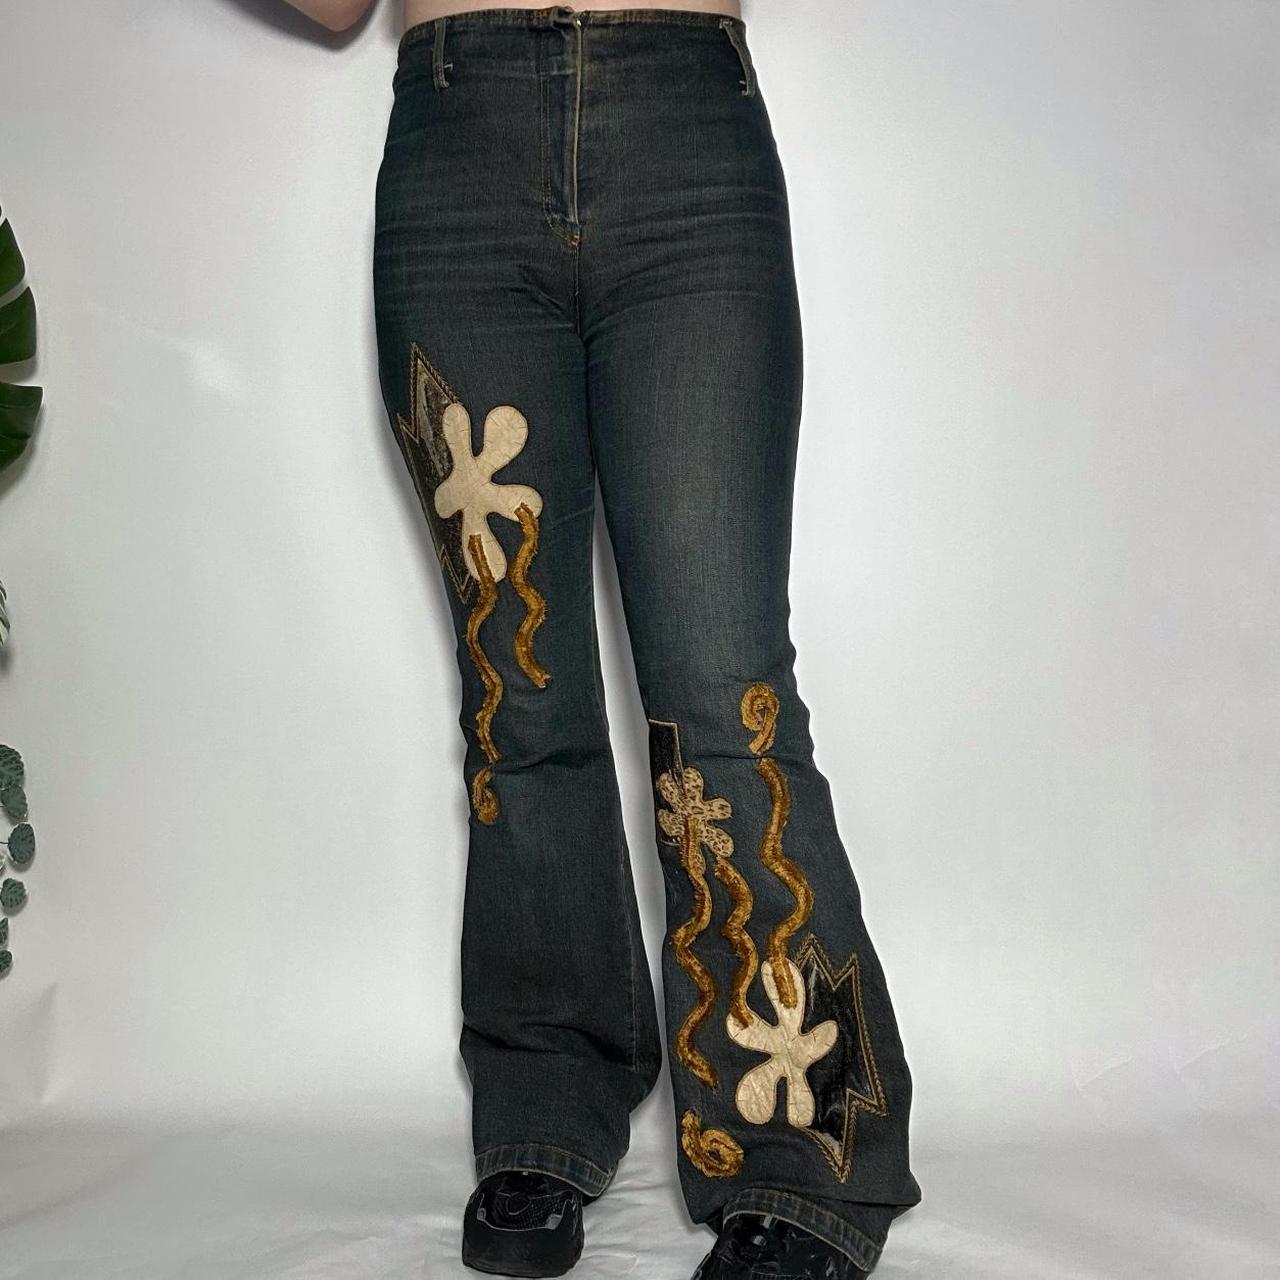 Vintage y2k fairycore flared jeans with brown floral patchwork embroidery